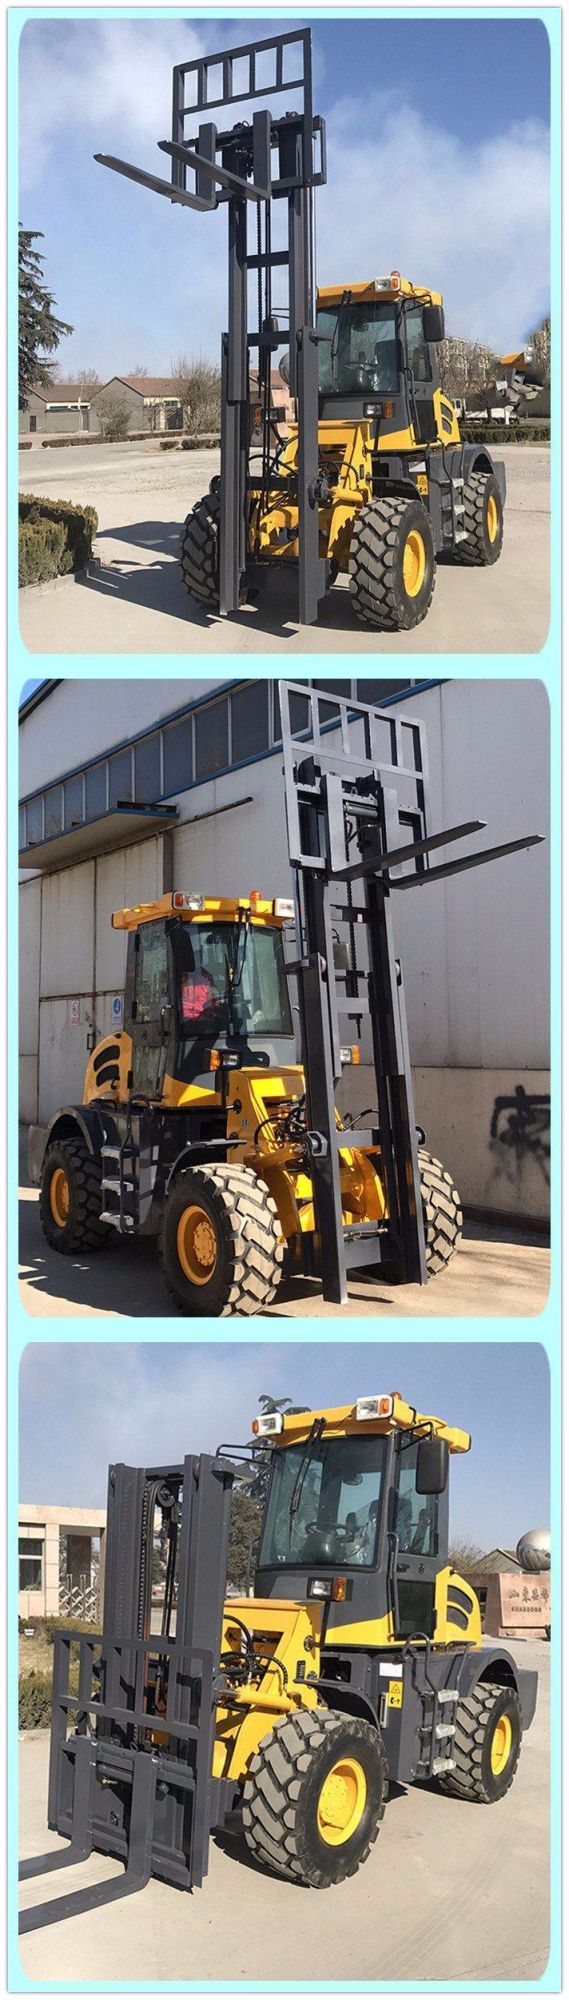 High Quality 3Tton Rated Load Rough Cross Forklift for Sale